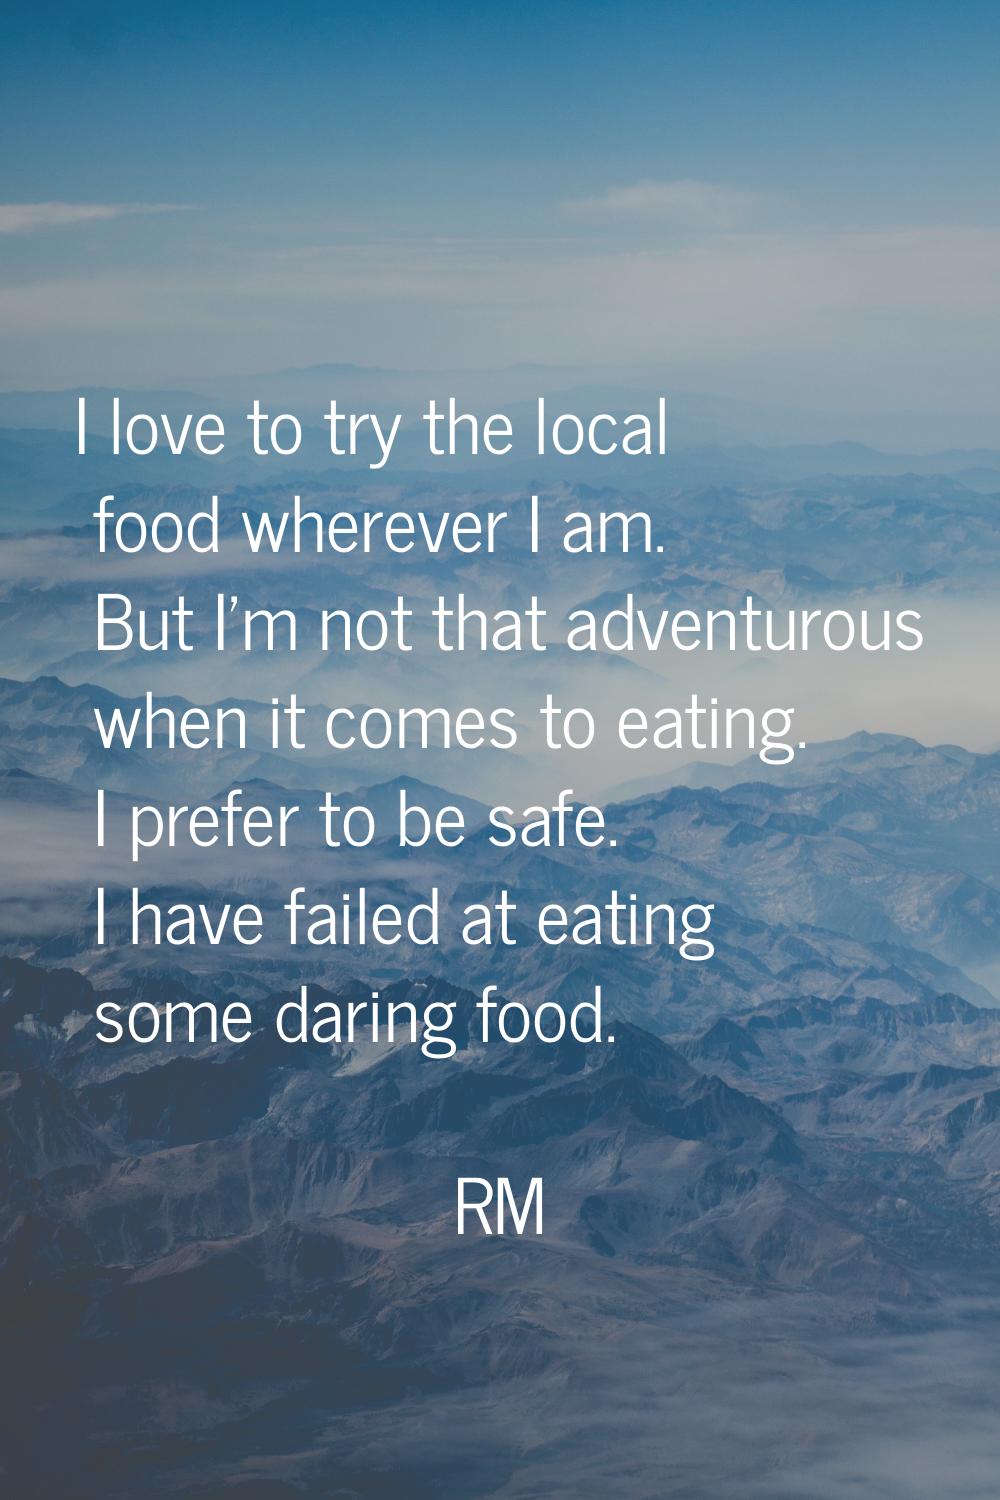 I love to try the local food wherever I am. But I'm not that adventurous when it comes to eating. I